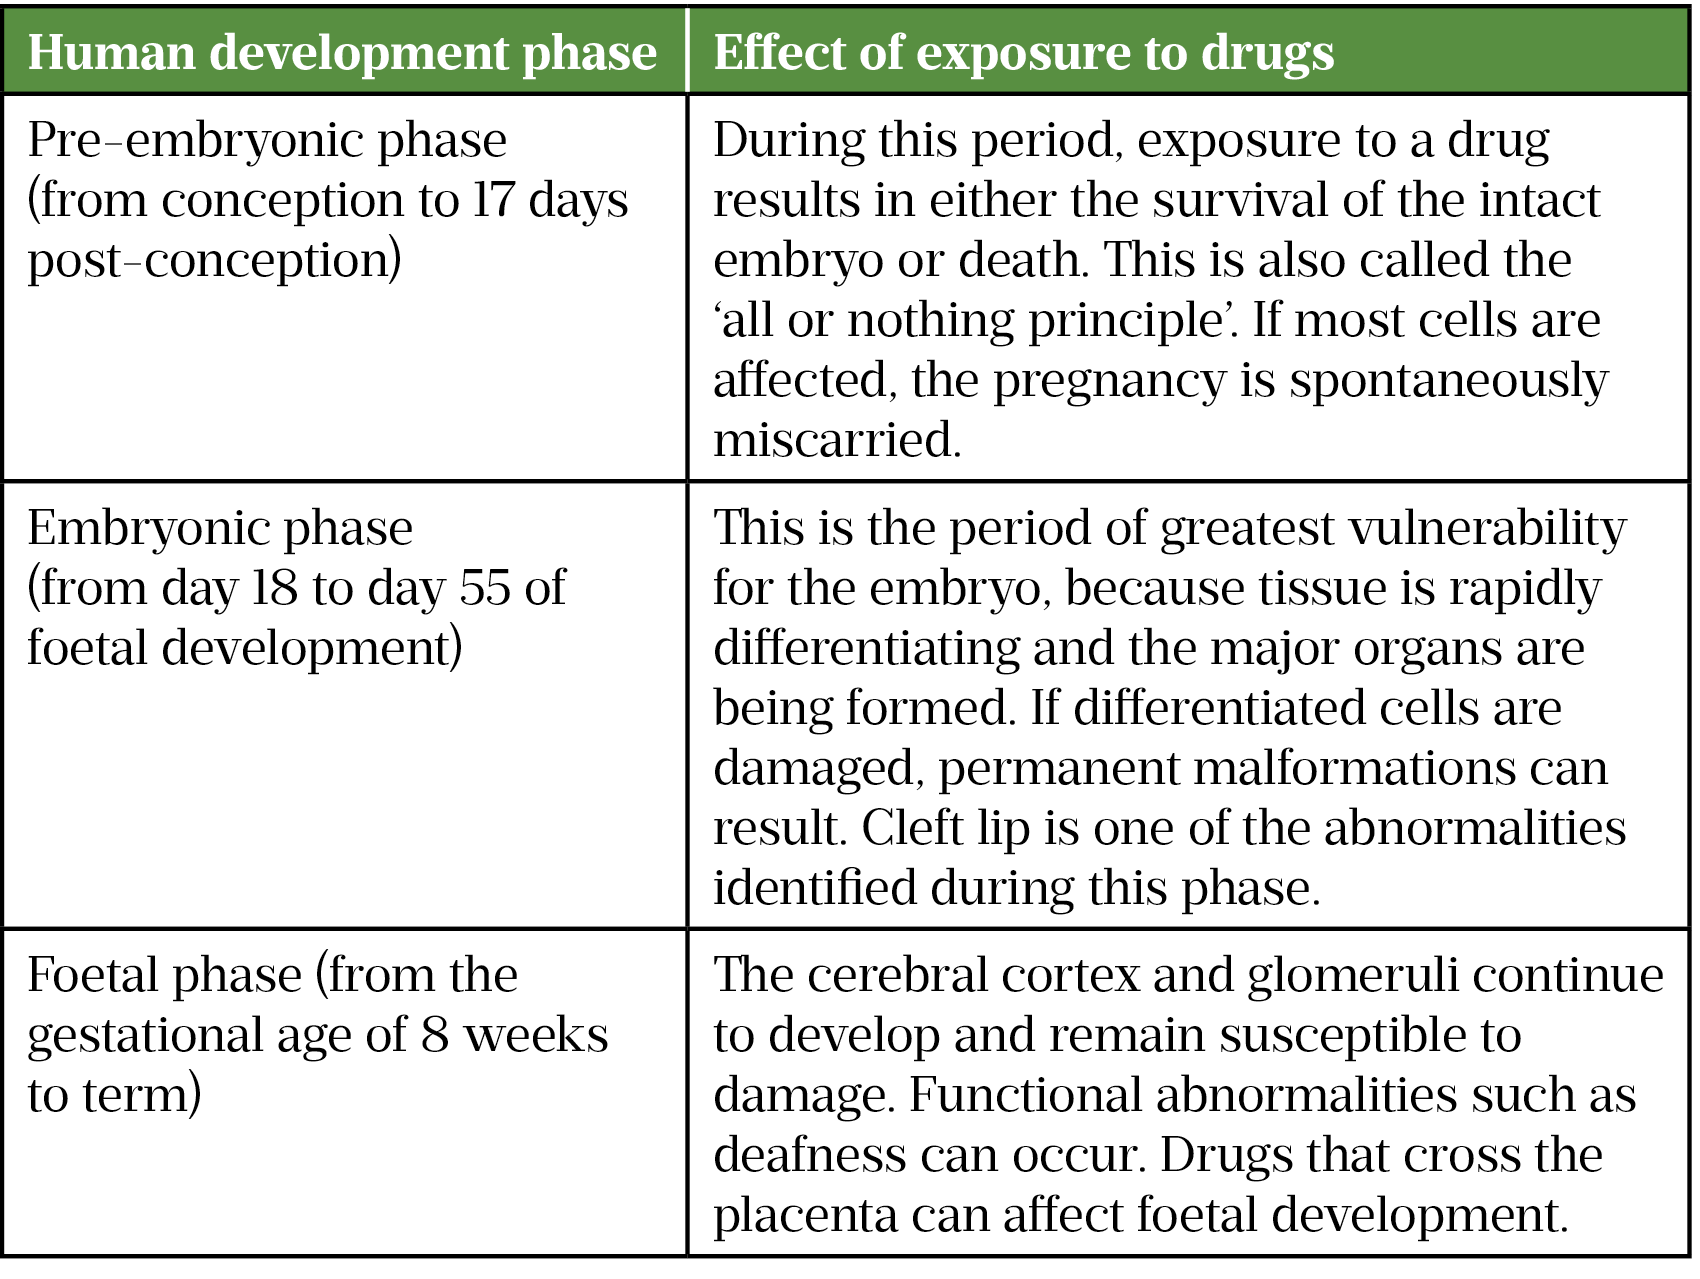 Table 1: Important phases in human development